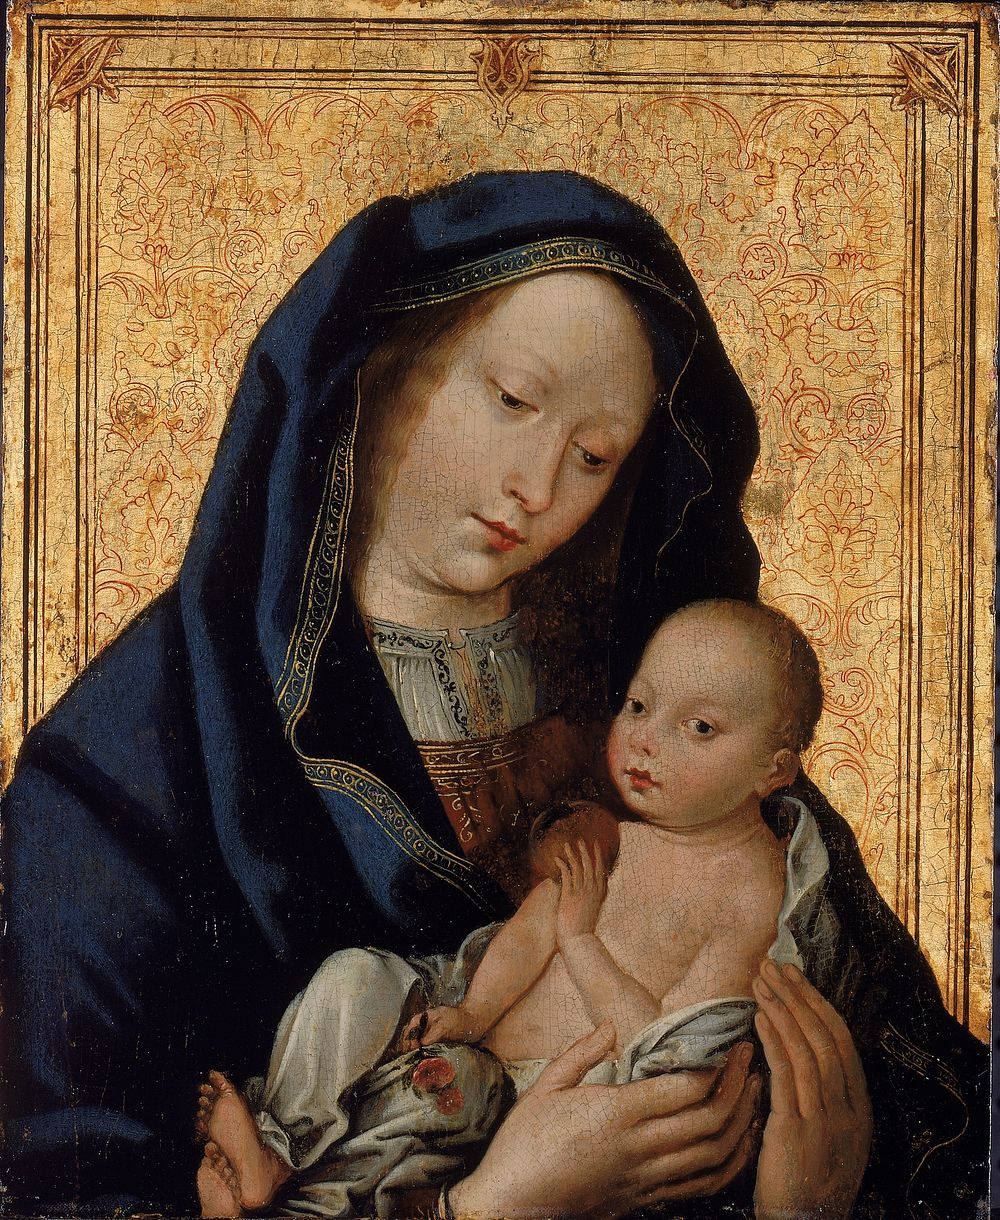 Virgin and Child with Apple, Smithsonian American Art Museum, Bequest of Mabel Johnson Langhorne